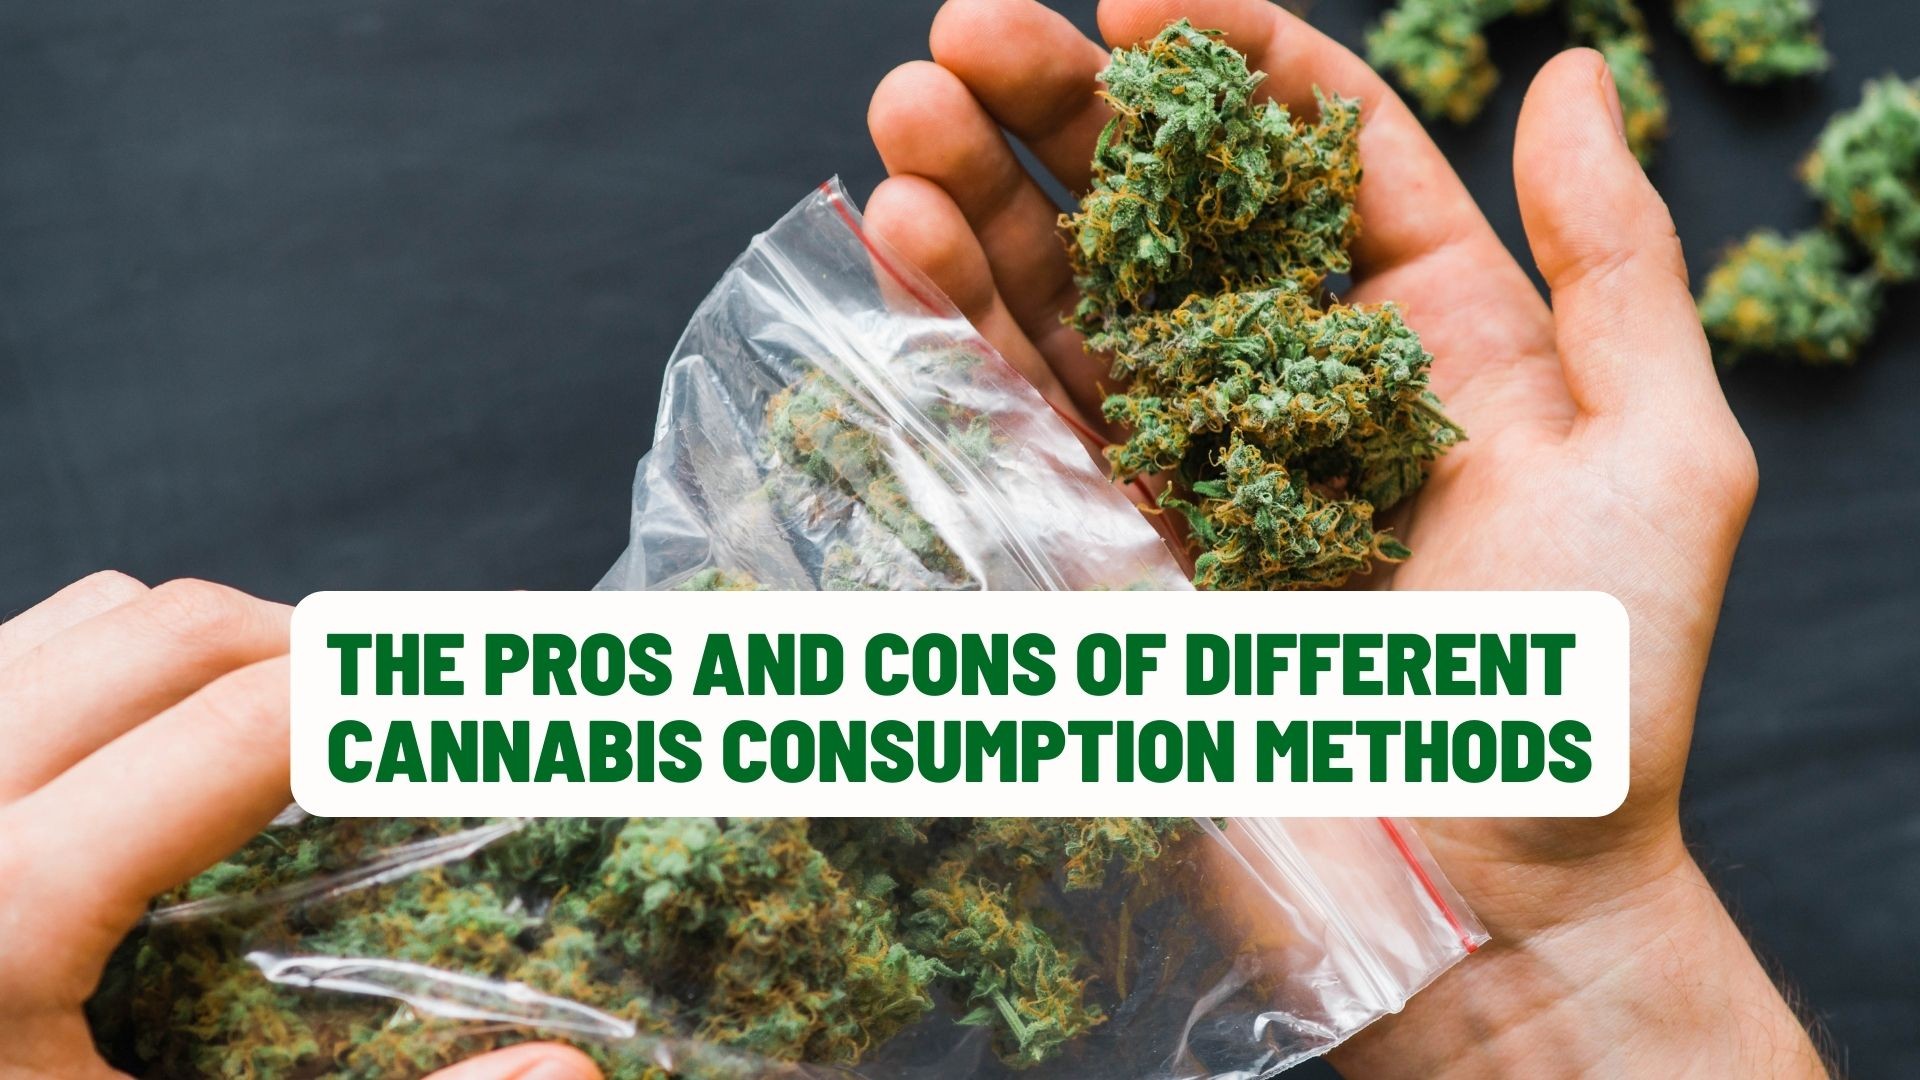 The Pros and Cons of Different Cannabis Consumption Methods